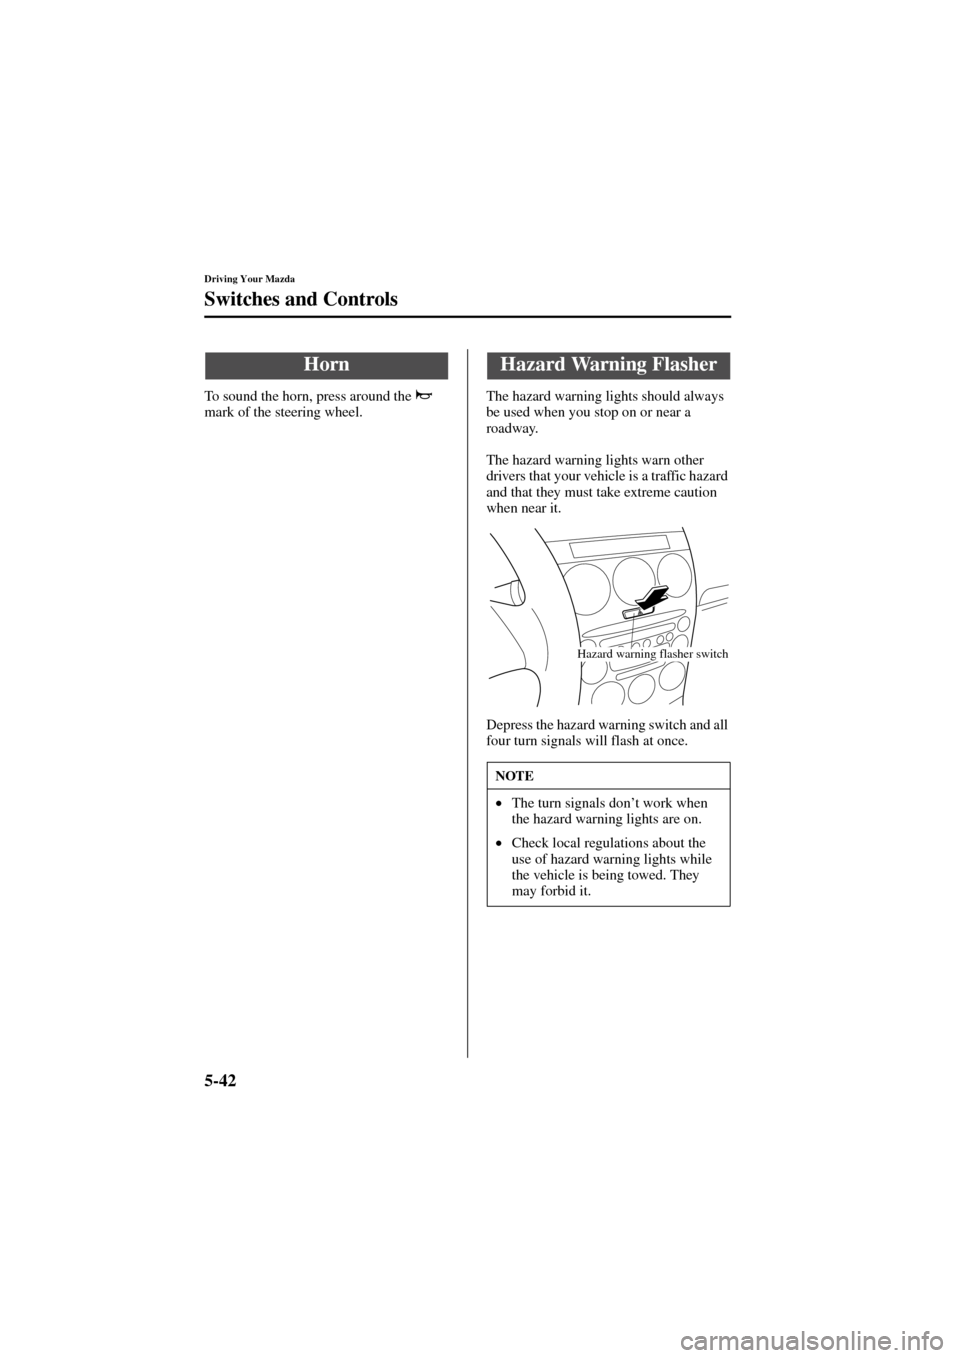 MAZDA MODEL 6 2004   (in English) Owners Manual 5-42
Driving Your Mazda
Switches and Controls
Form No. 8R29-EA-02I
To sound the horn, press around the   
mark of the steering wheel.The hazard warning lights should always 
be used when you stop on o